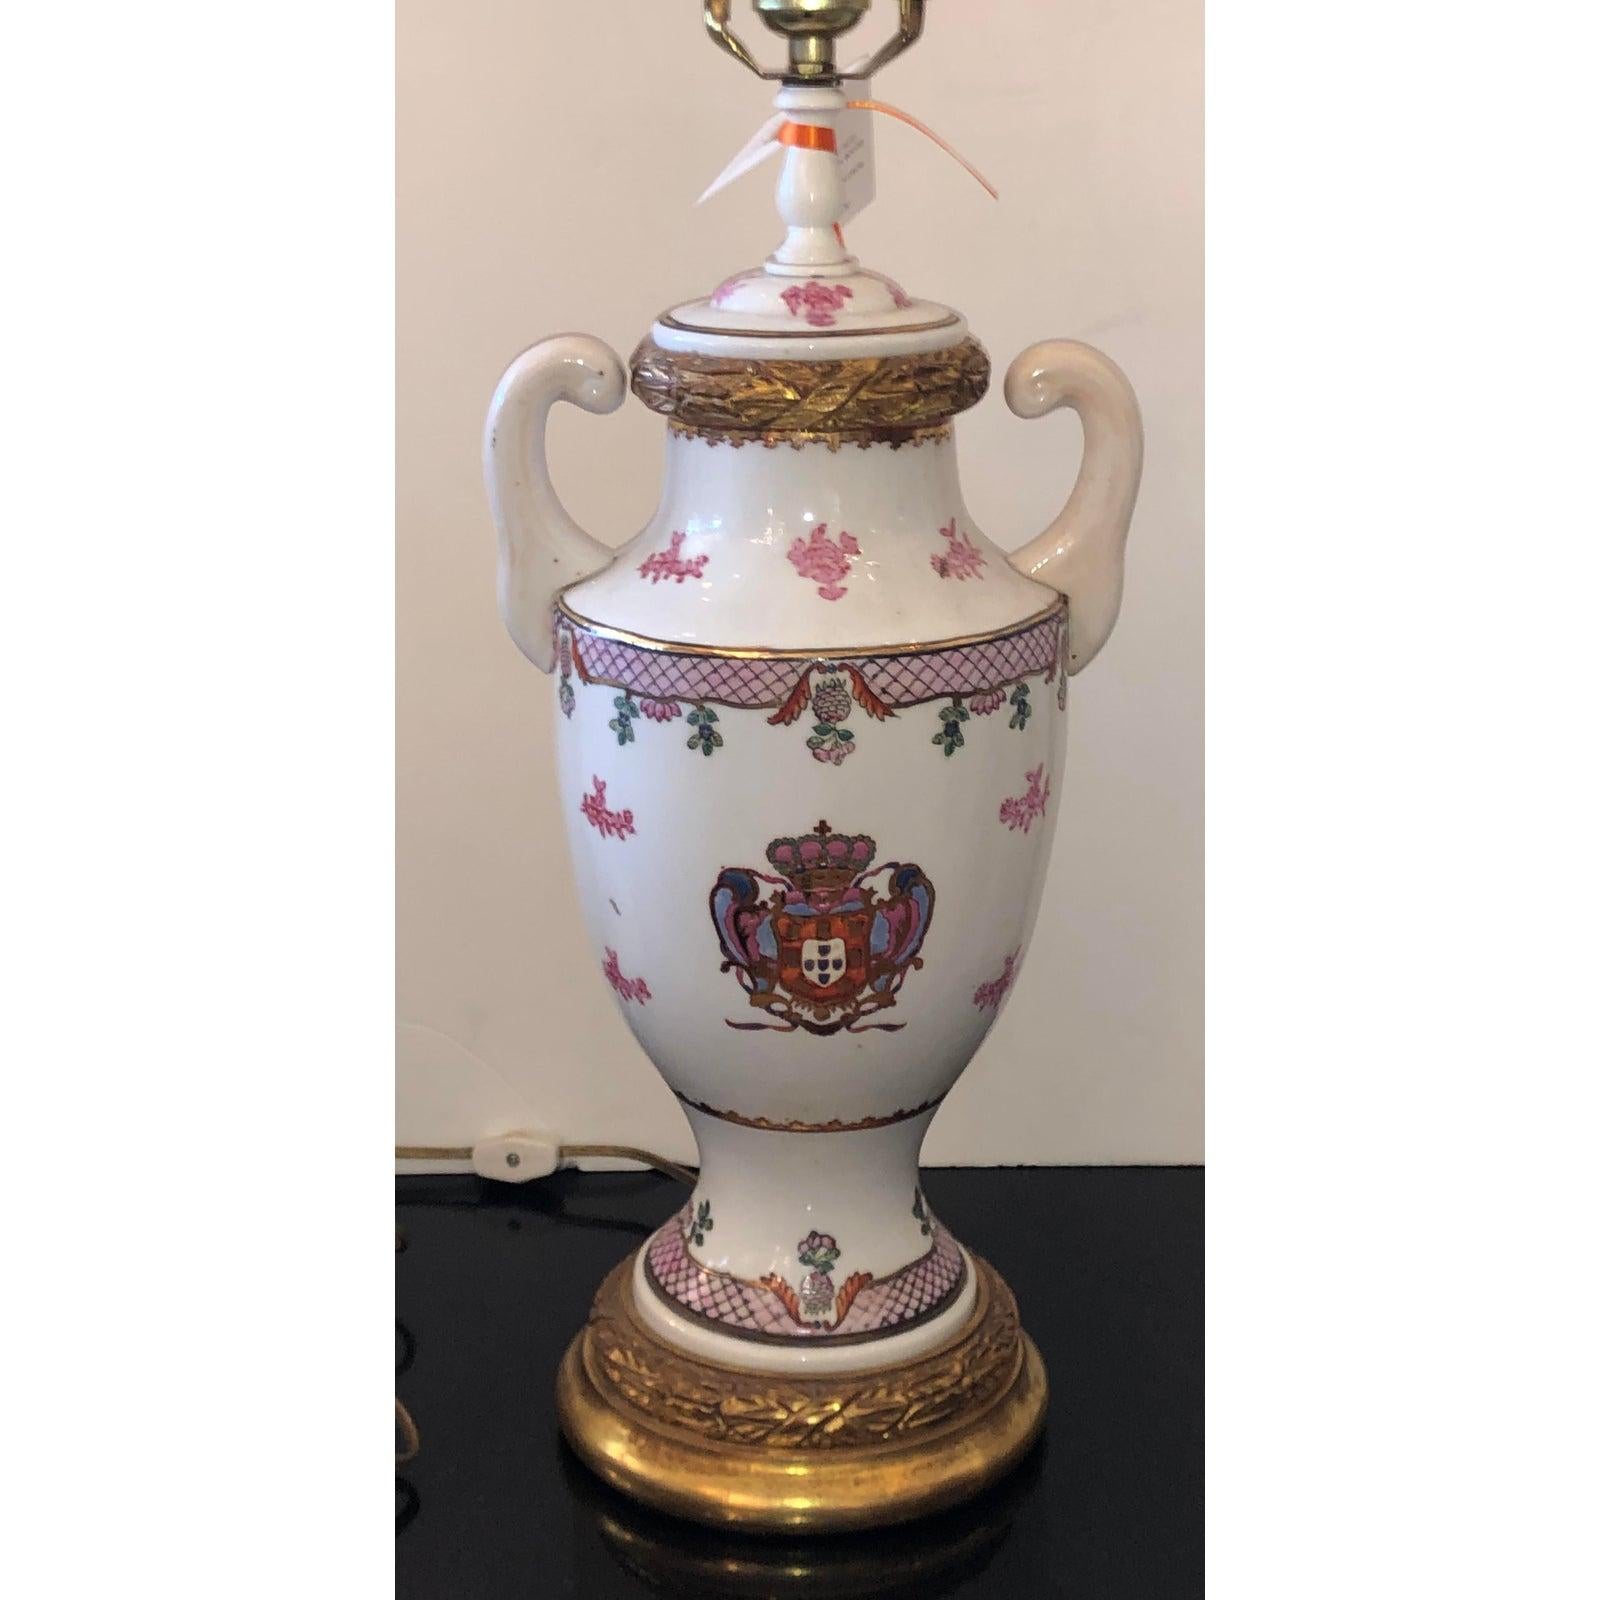 Antique Samson French porcelain vase - Chinese armorial crest table lamp. Includes harp and finial.

Additional information:
Materials: Porcelain
Color: White
Brand: Samson & Cie
Designer: Samson & Cie
Period: 19th century
Styles: Chinese,